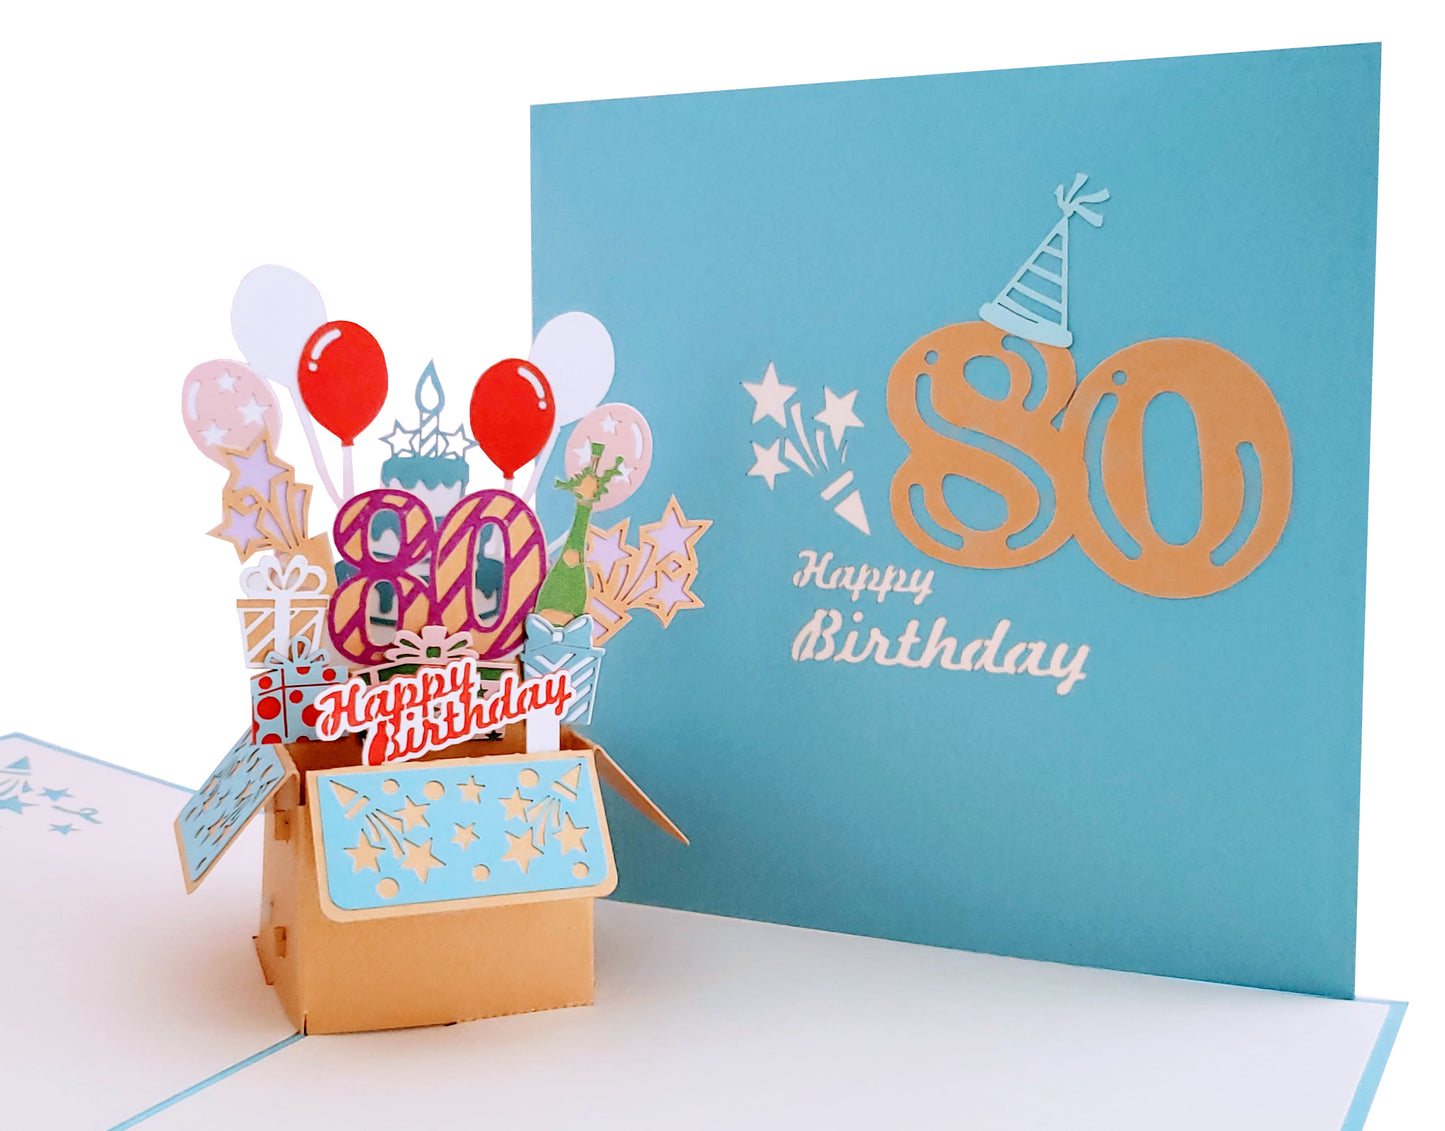 Happy 80th Blue Birthday Party Box 3D Pop Up Greeting Card - best wishes - Birthday - Celebration - iGifts And Cards